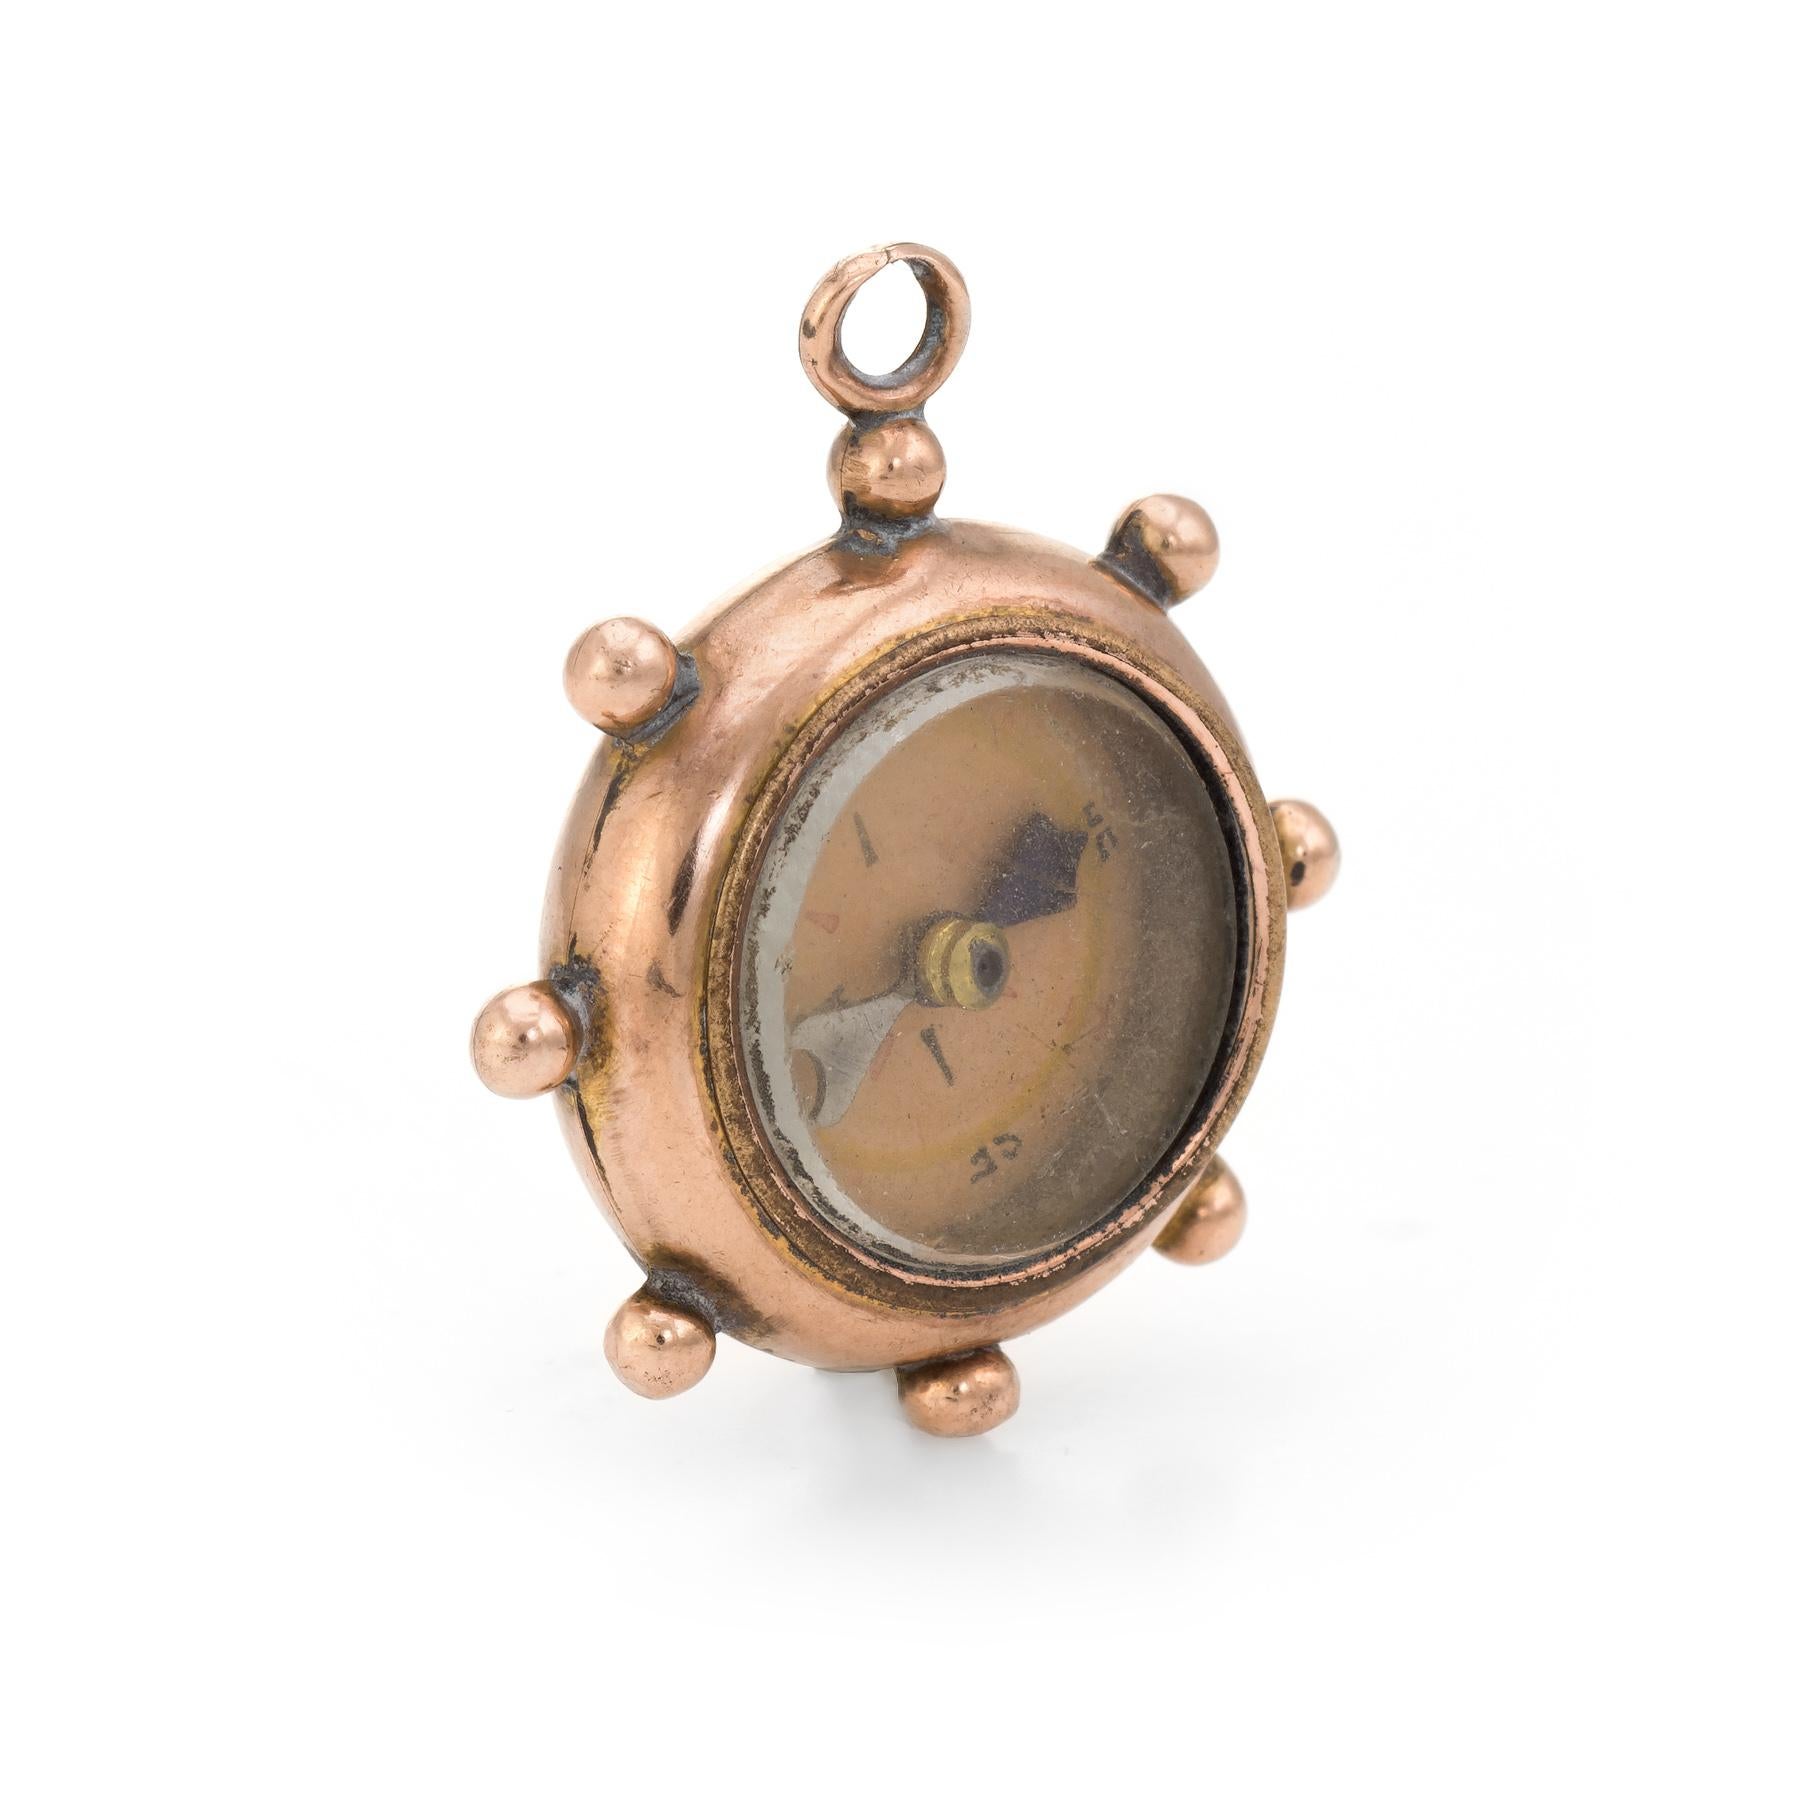 Finely detailed antique Victorian compass fob crafted in 9k rose gold (circa 1897).   

Originally the compass would have been worn alongside a pocket watch. The ships wheel was a popular nautical motif during the Victorian to Edwardian eras. The